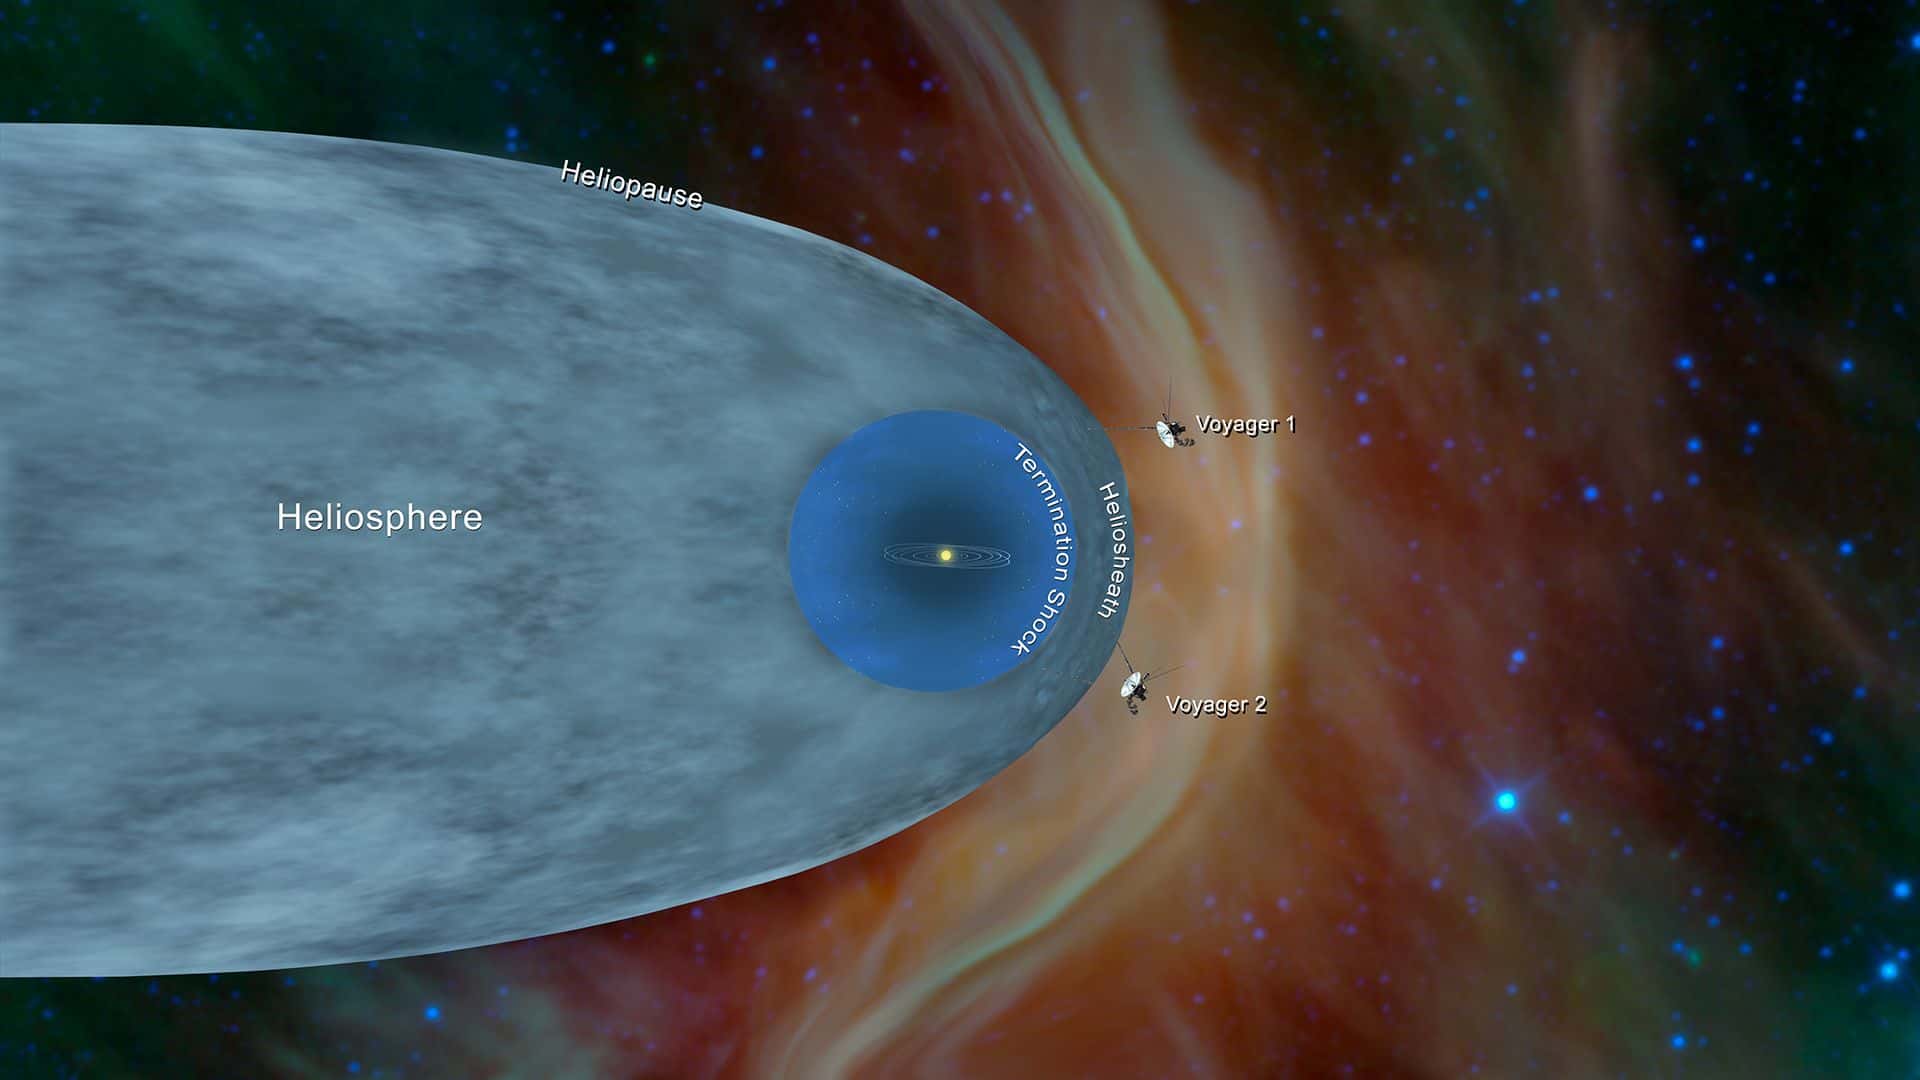 The positions of Voyager 1 and Voyager 2 in the interstellar space